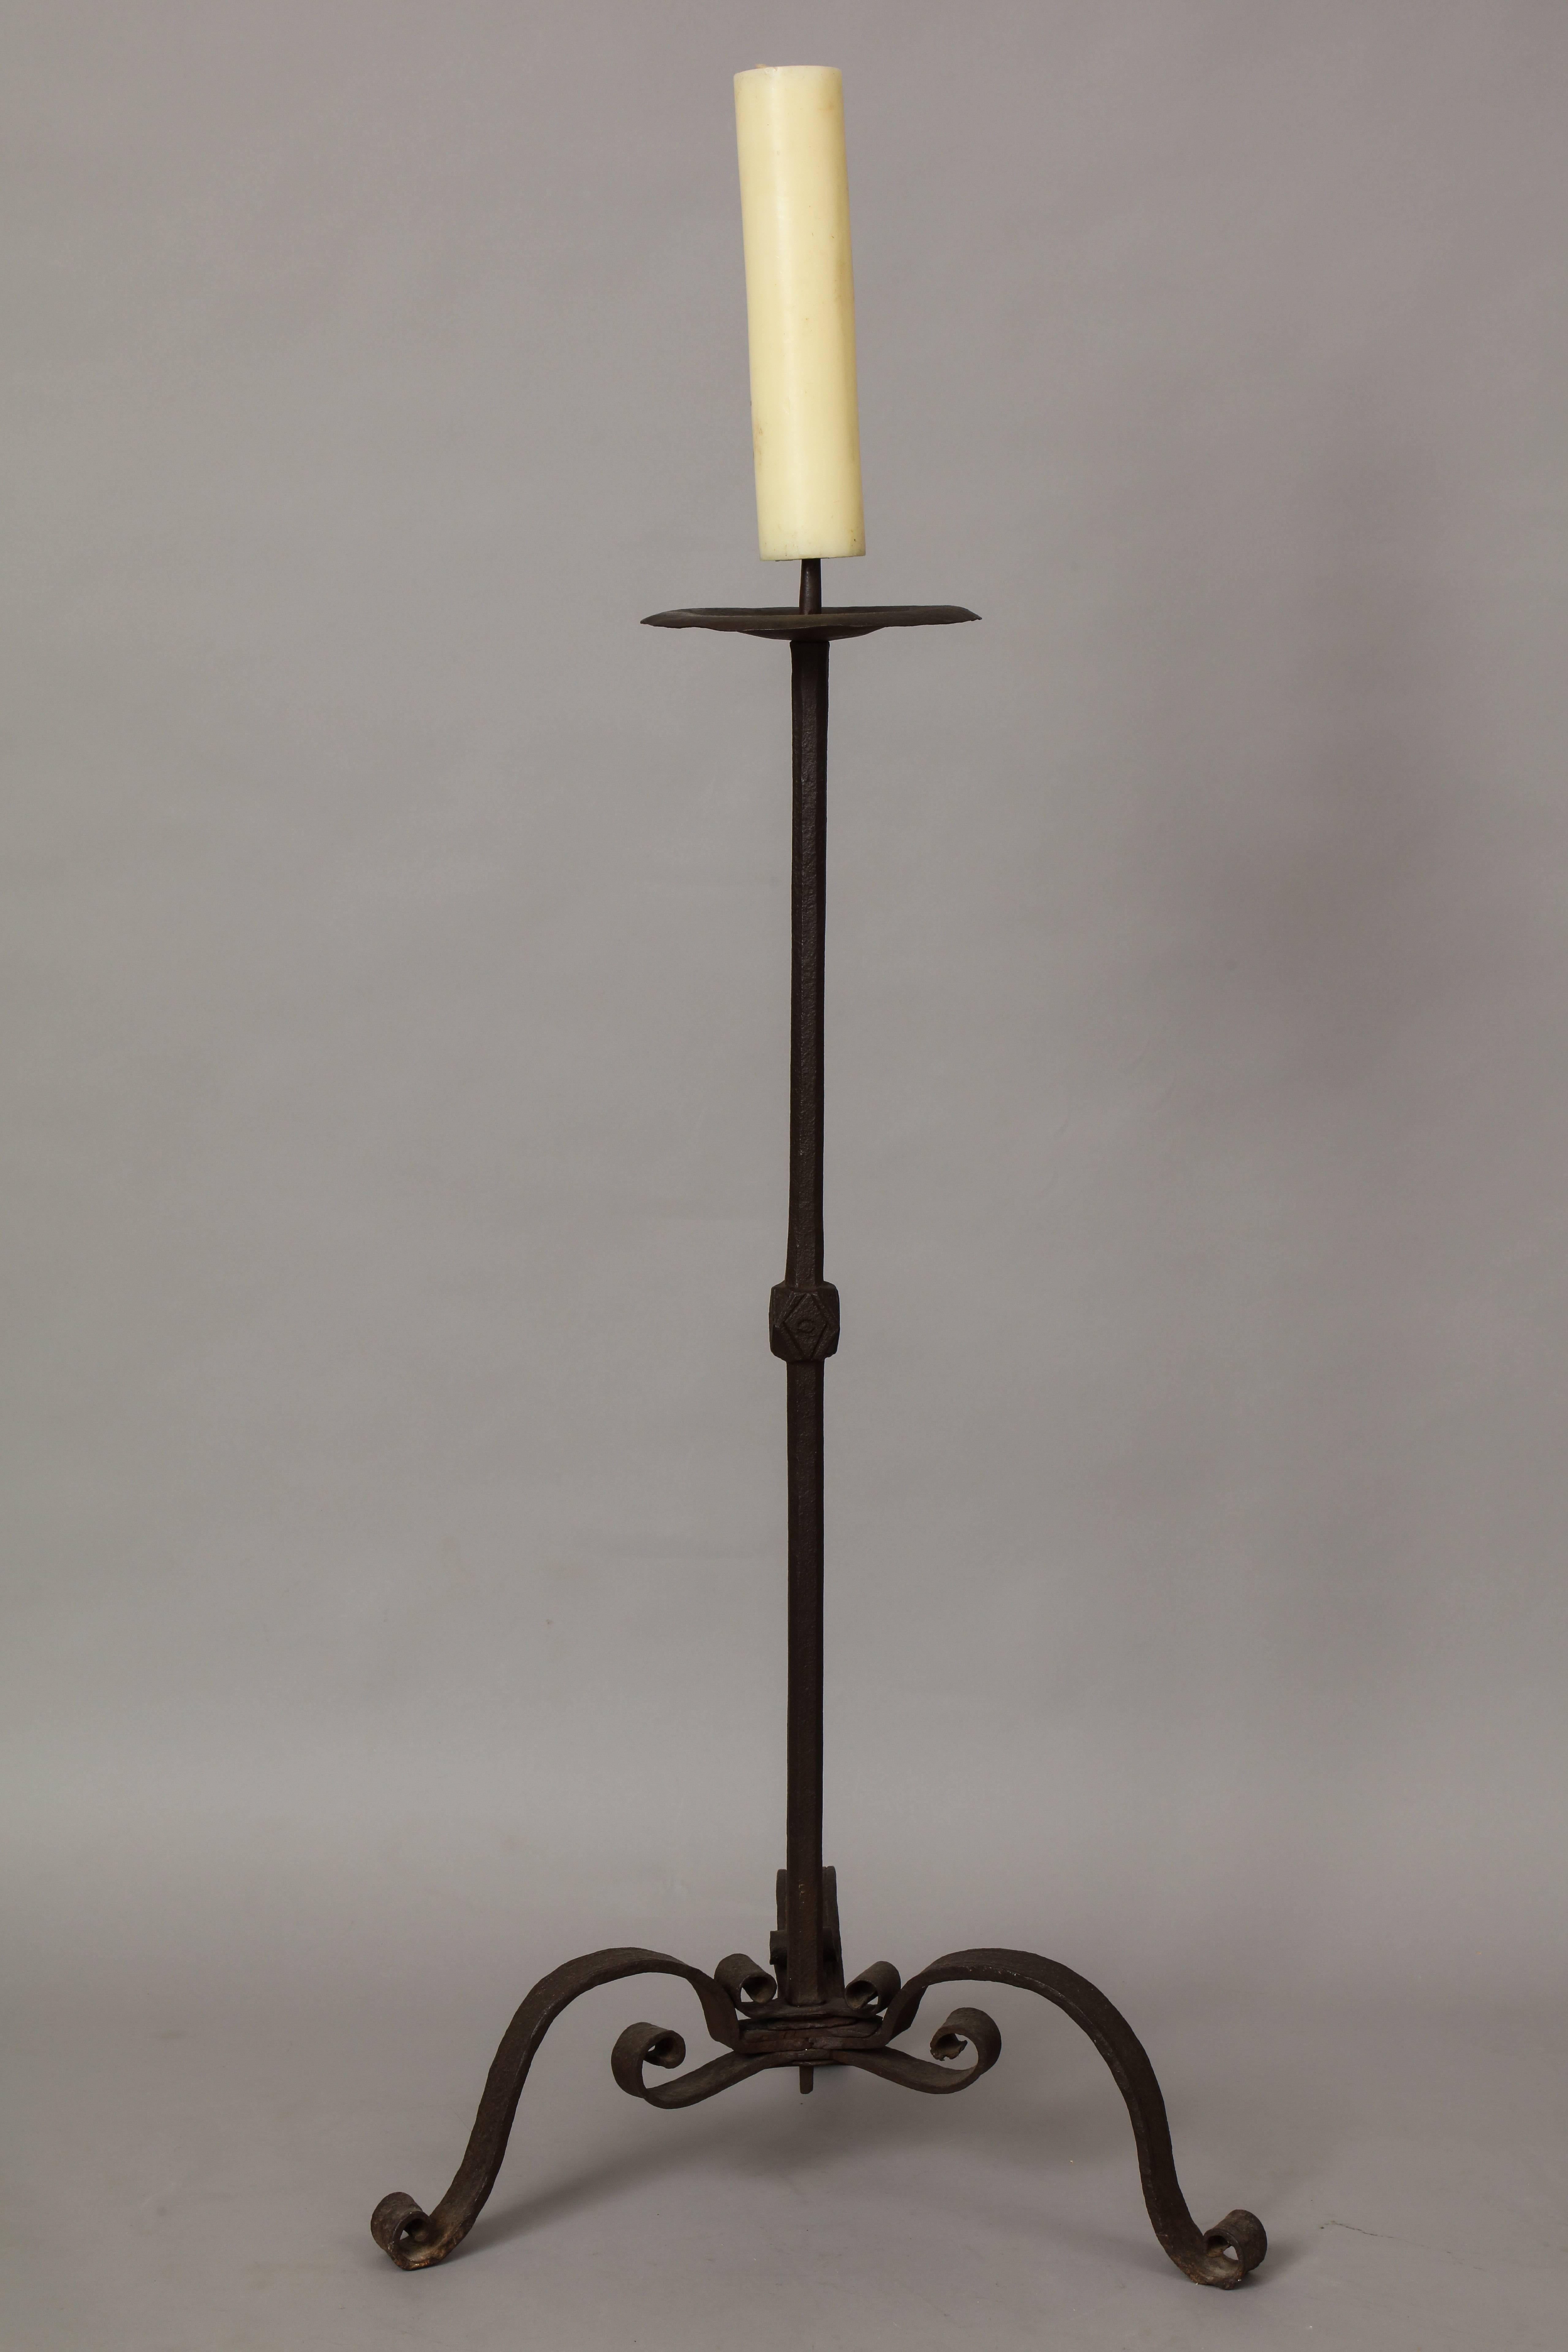 A single candle wrought iron candelabra with tripod base and faceted knob on shaft.
Italy, 15th century.
Size: 55 ̋ high x 24 ̋ diameter.